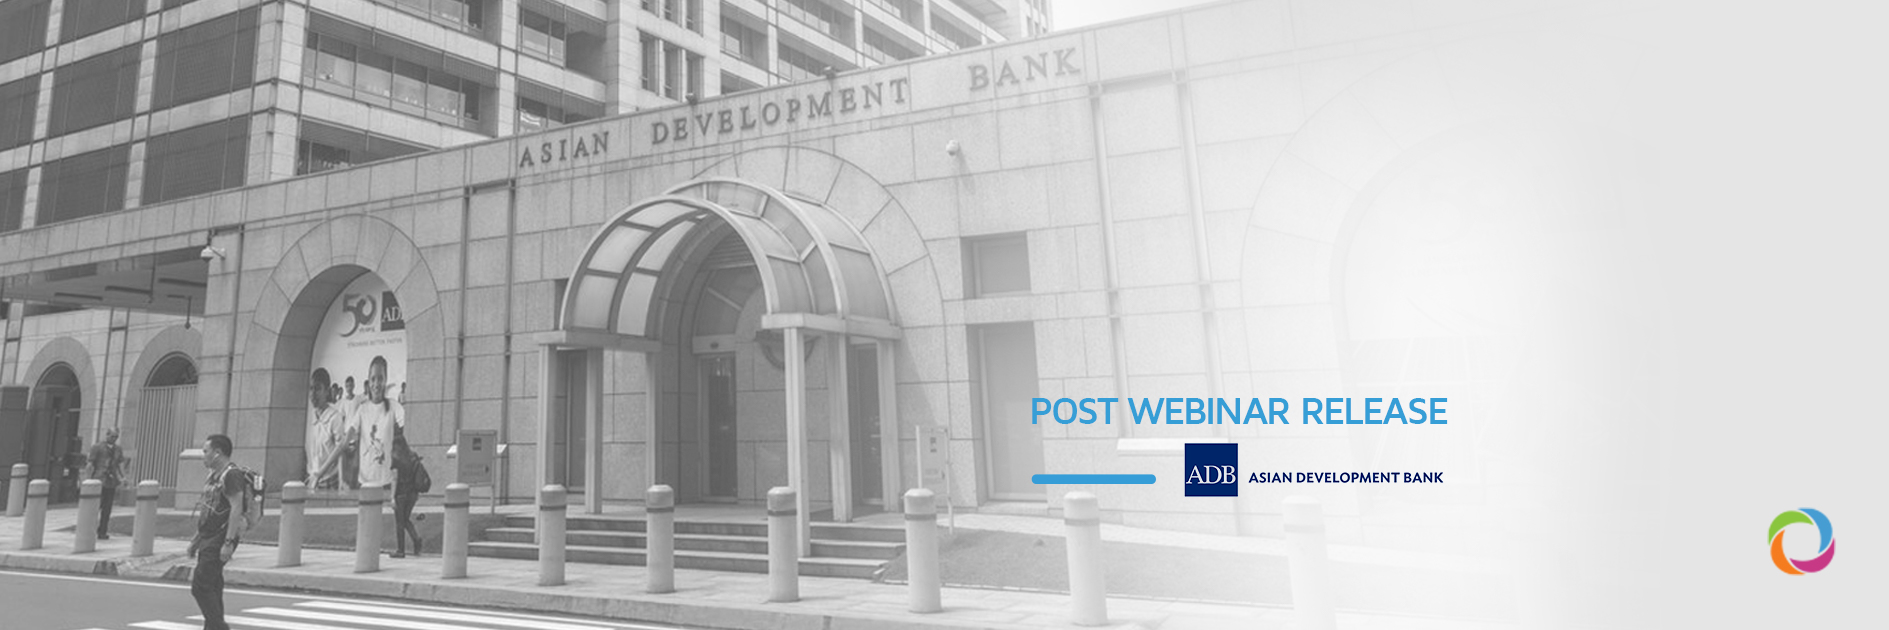 Post Webinar Release | “Doing business with the Asian Development Bank: procurement guidelines and best practices”